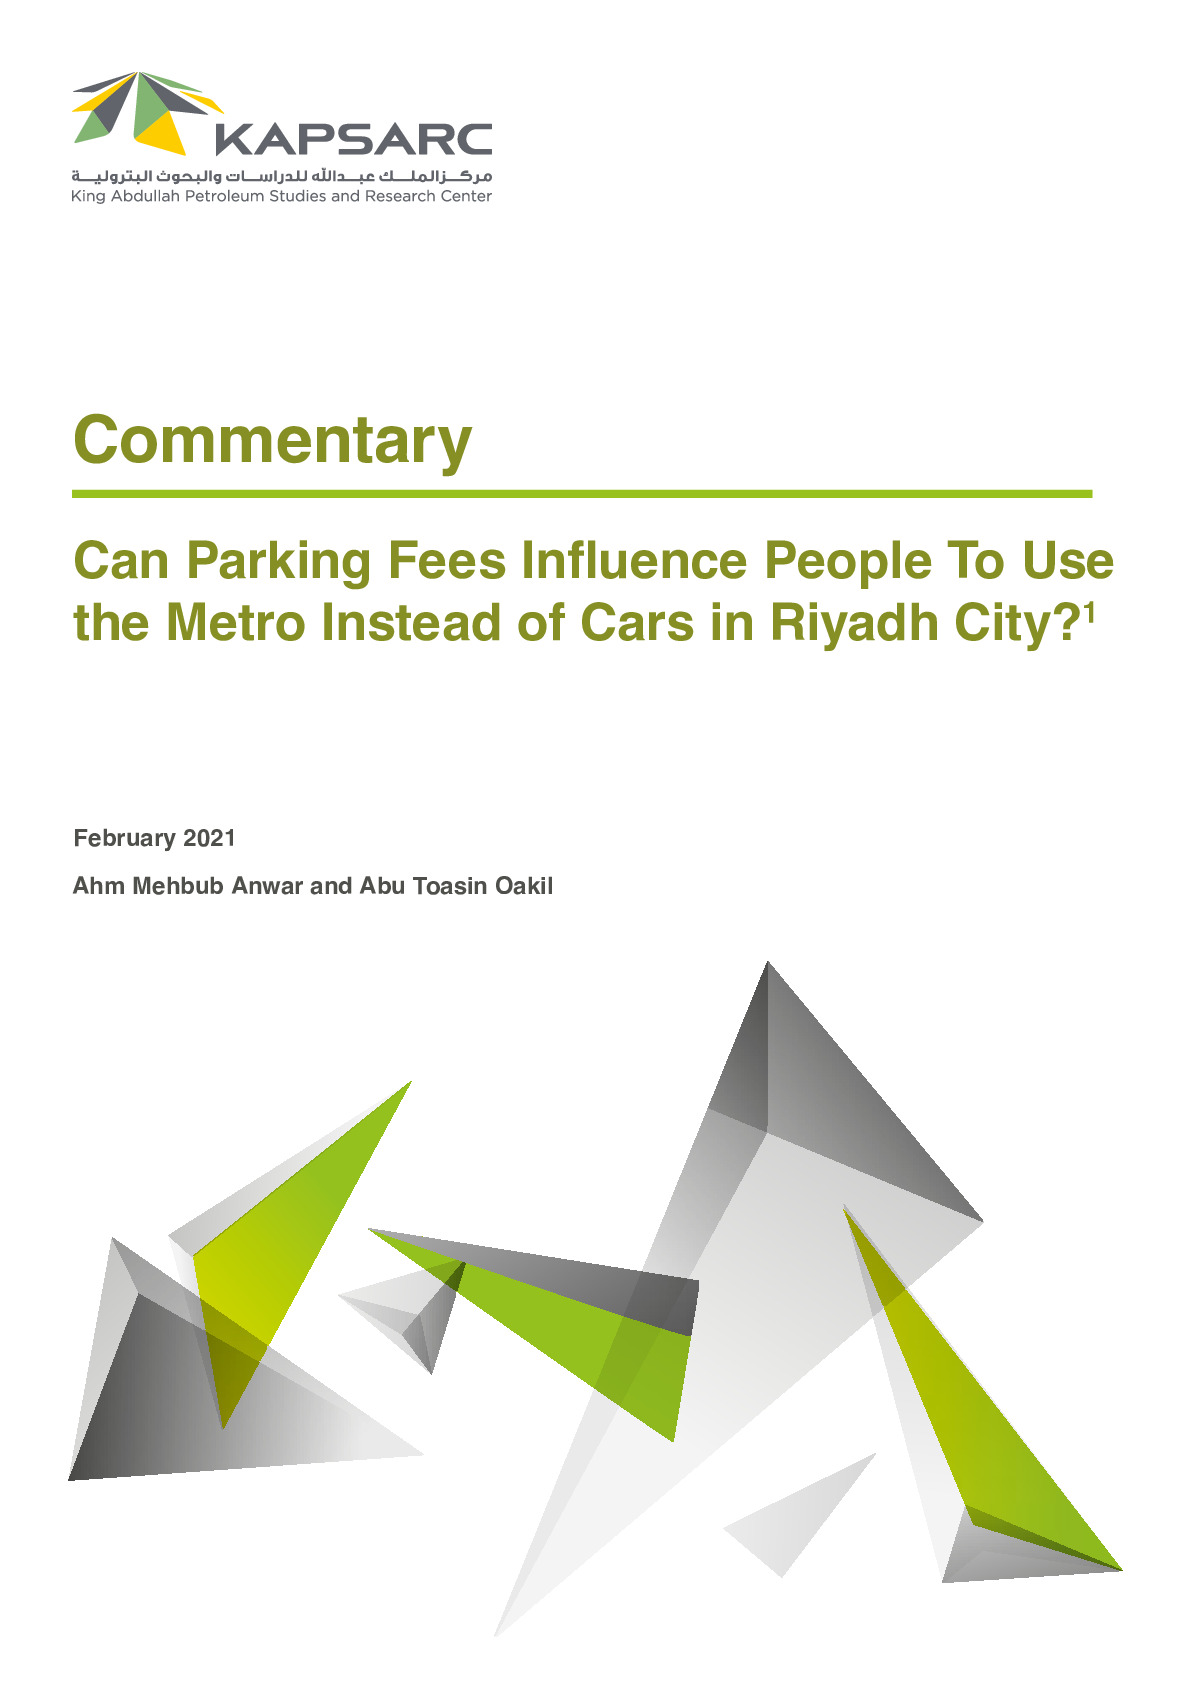 Can Parking Fees Influence People to Use the Metro Instead of Cars in Riyadh City?